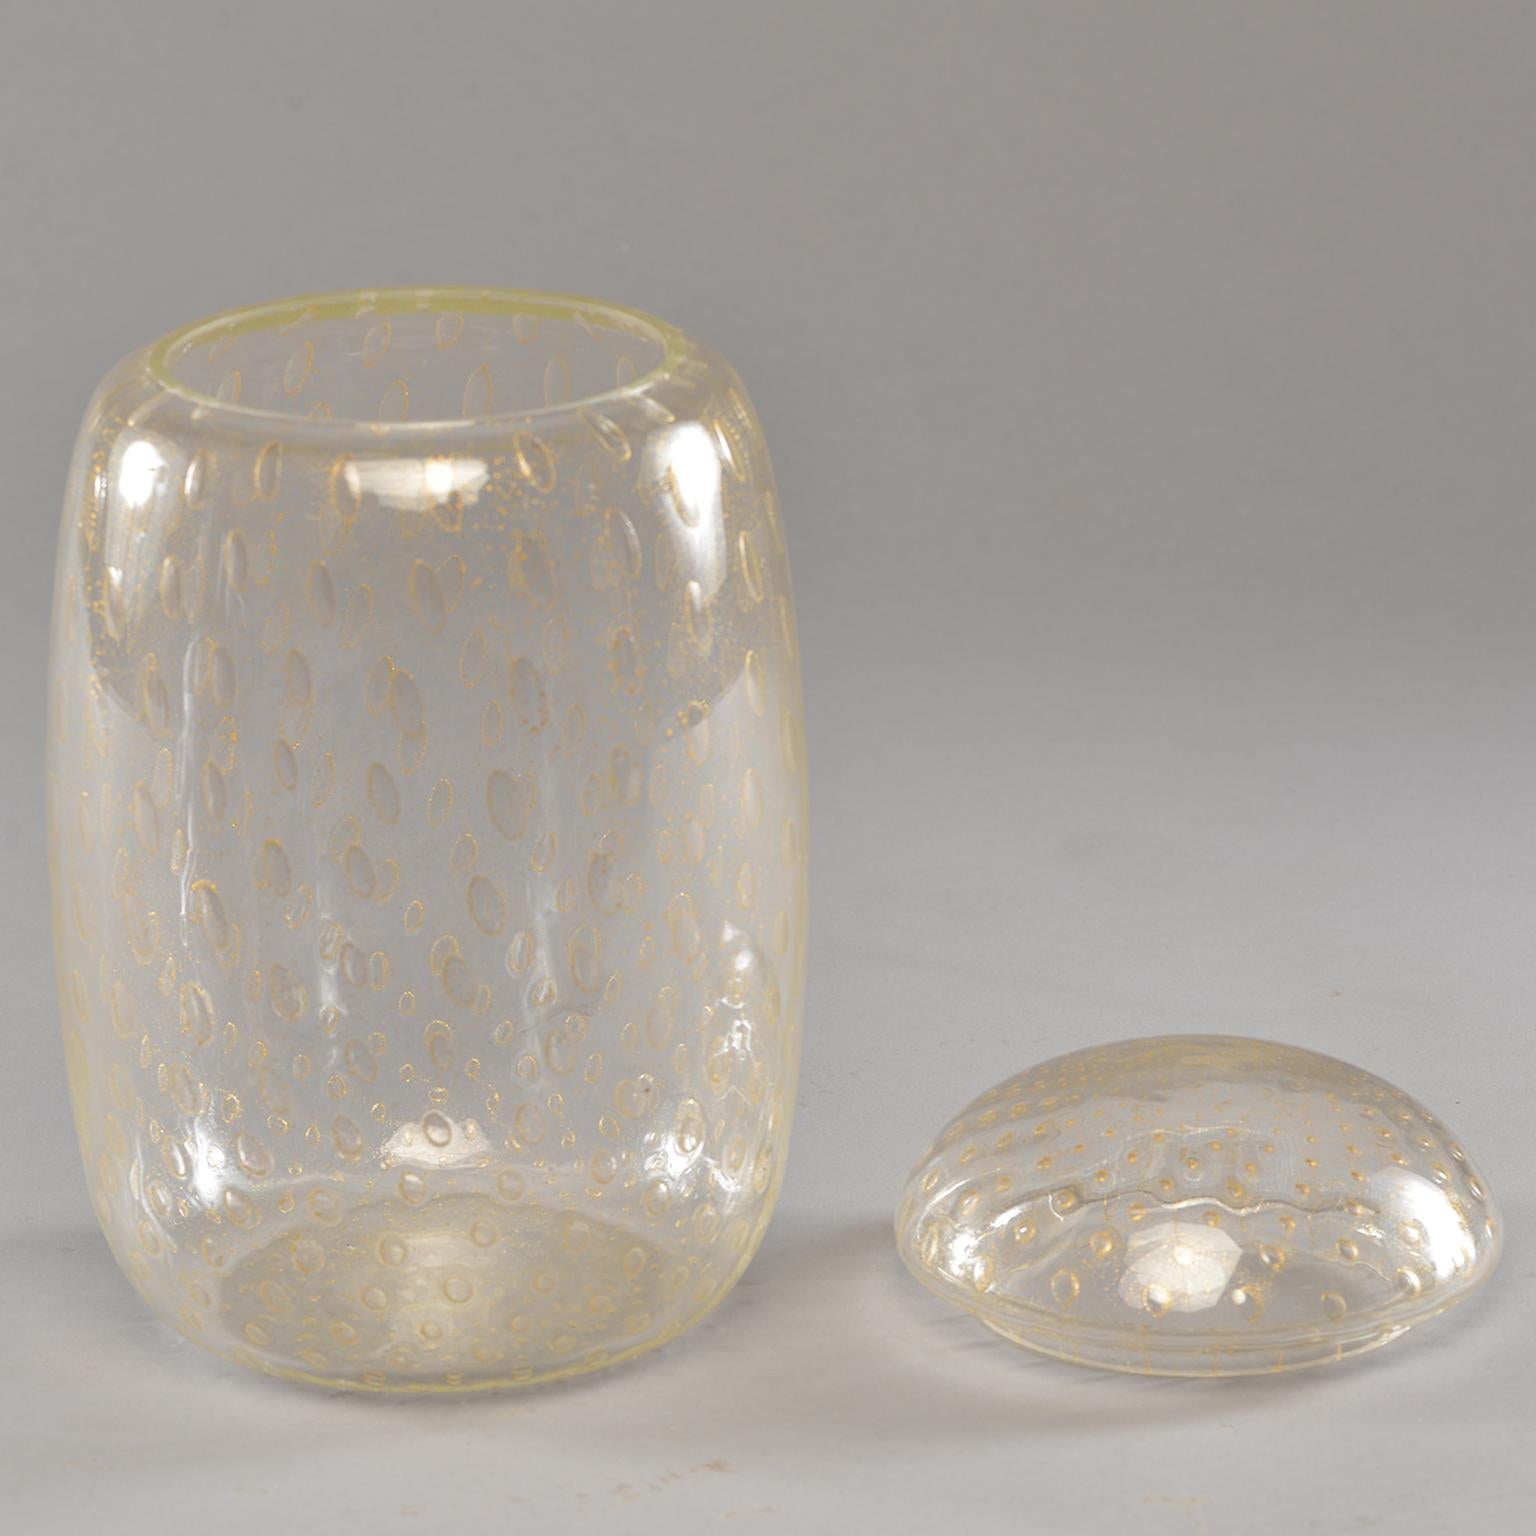 Tall Murano glass clear bubbled glass vessel with gold inclusions and dome-shaped lid, circa 1990s. Unknown maker. Excellent vintage condition with no flaws found.